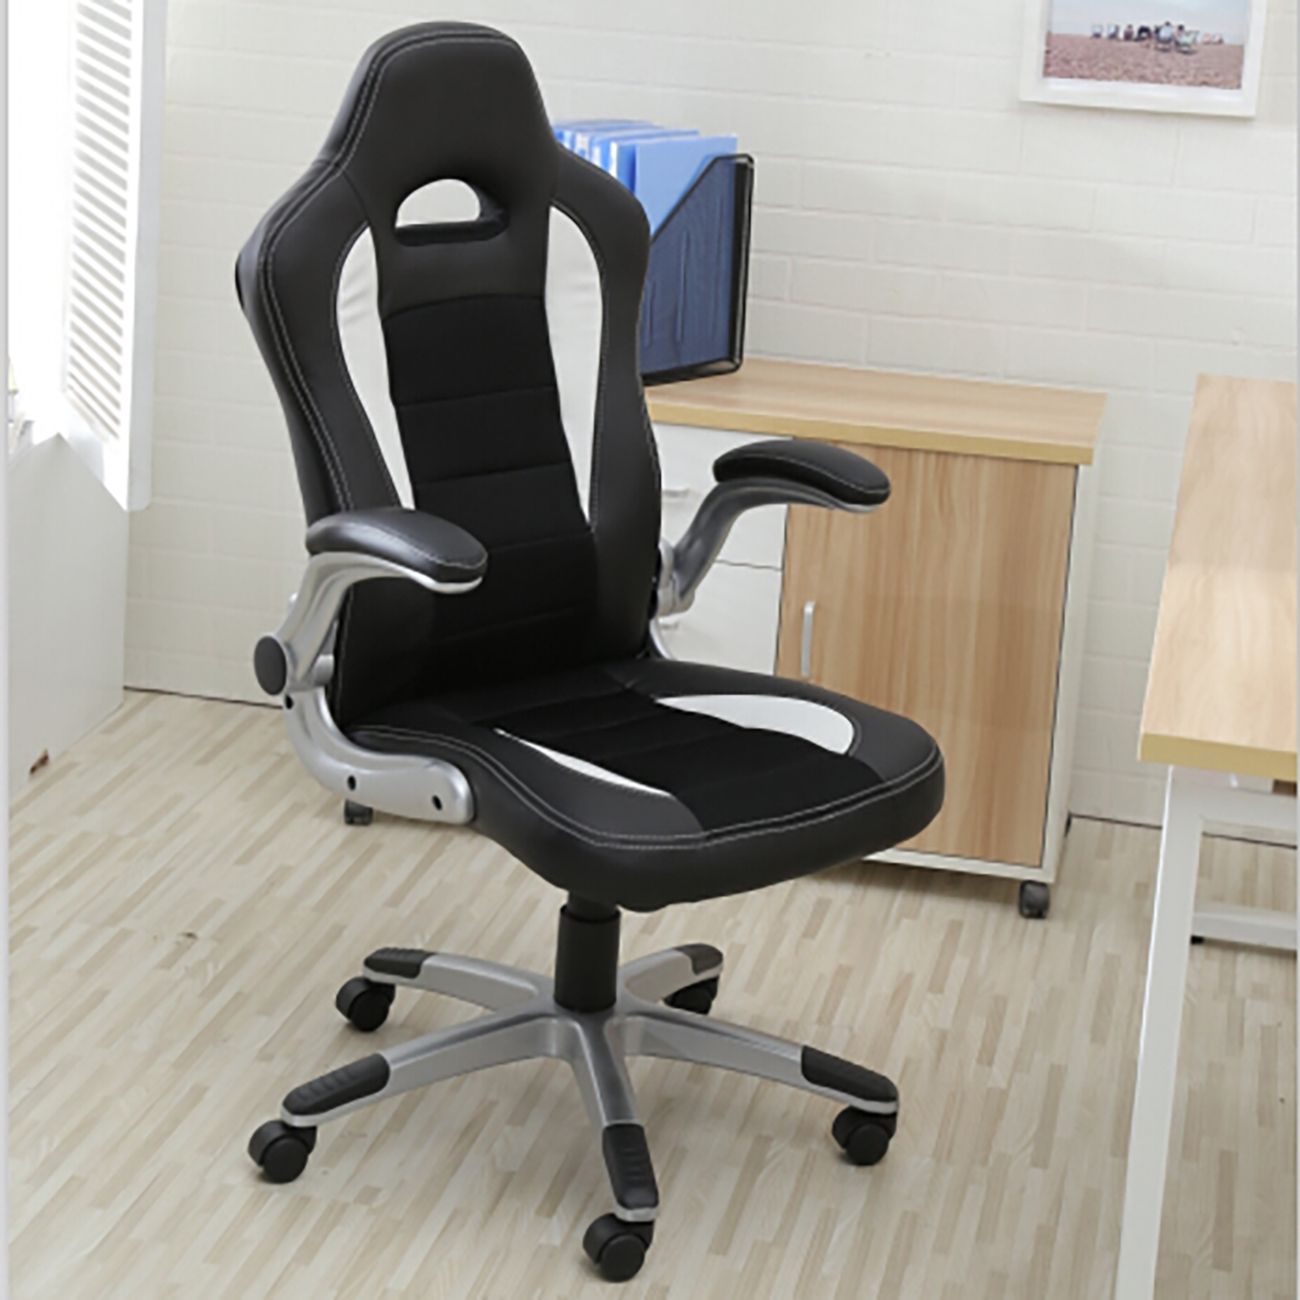 Office Chair Ergonomic Computer Pu Leather Desk Race Car Bucket In Popular Executive Office Chairs With Flip Up Arms (View 14 of 20)